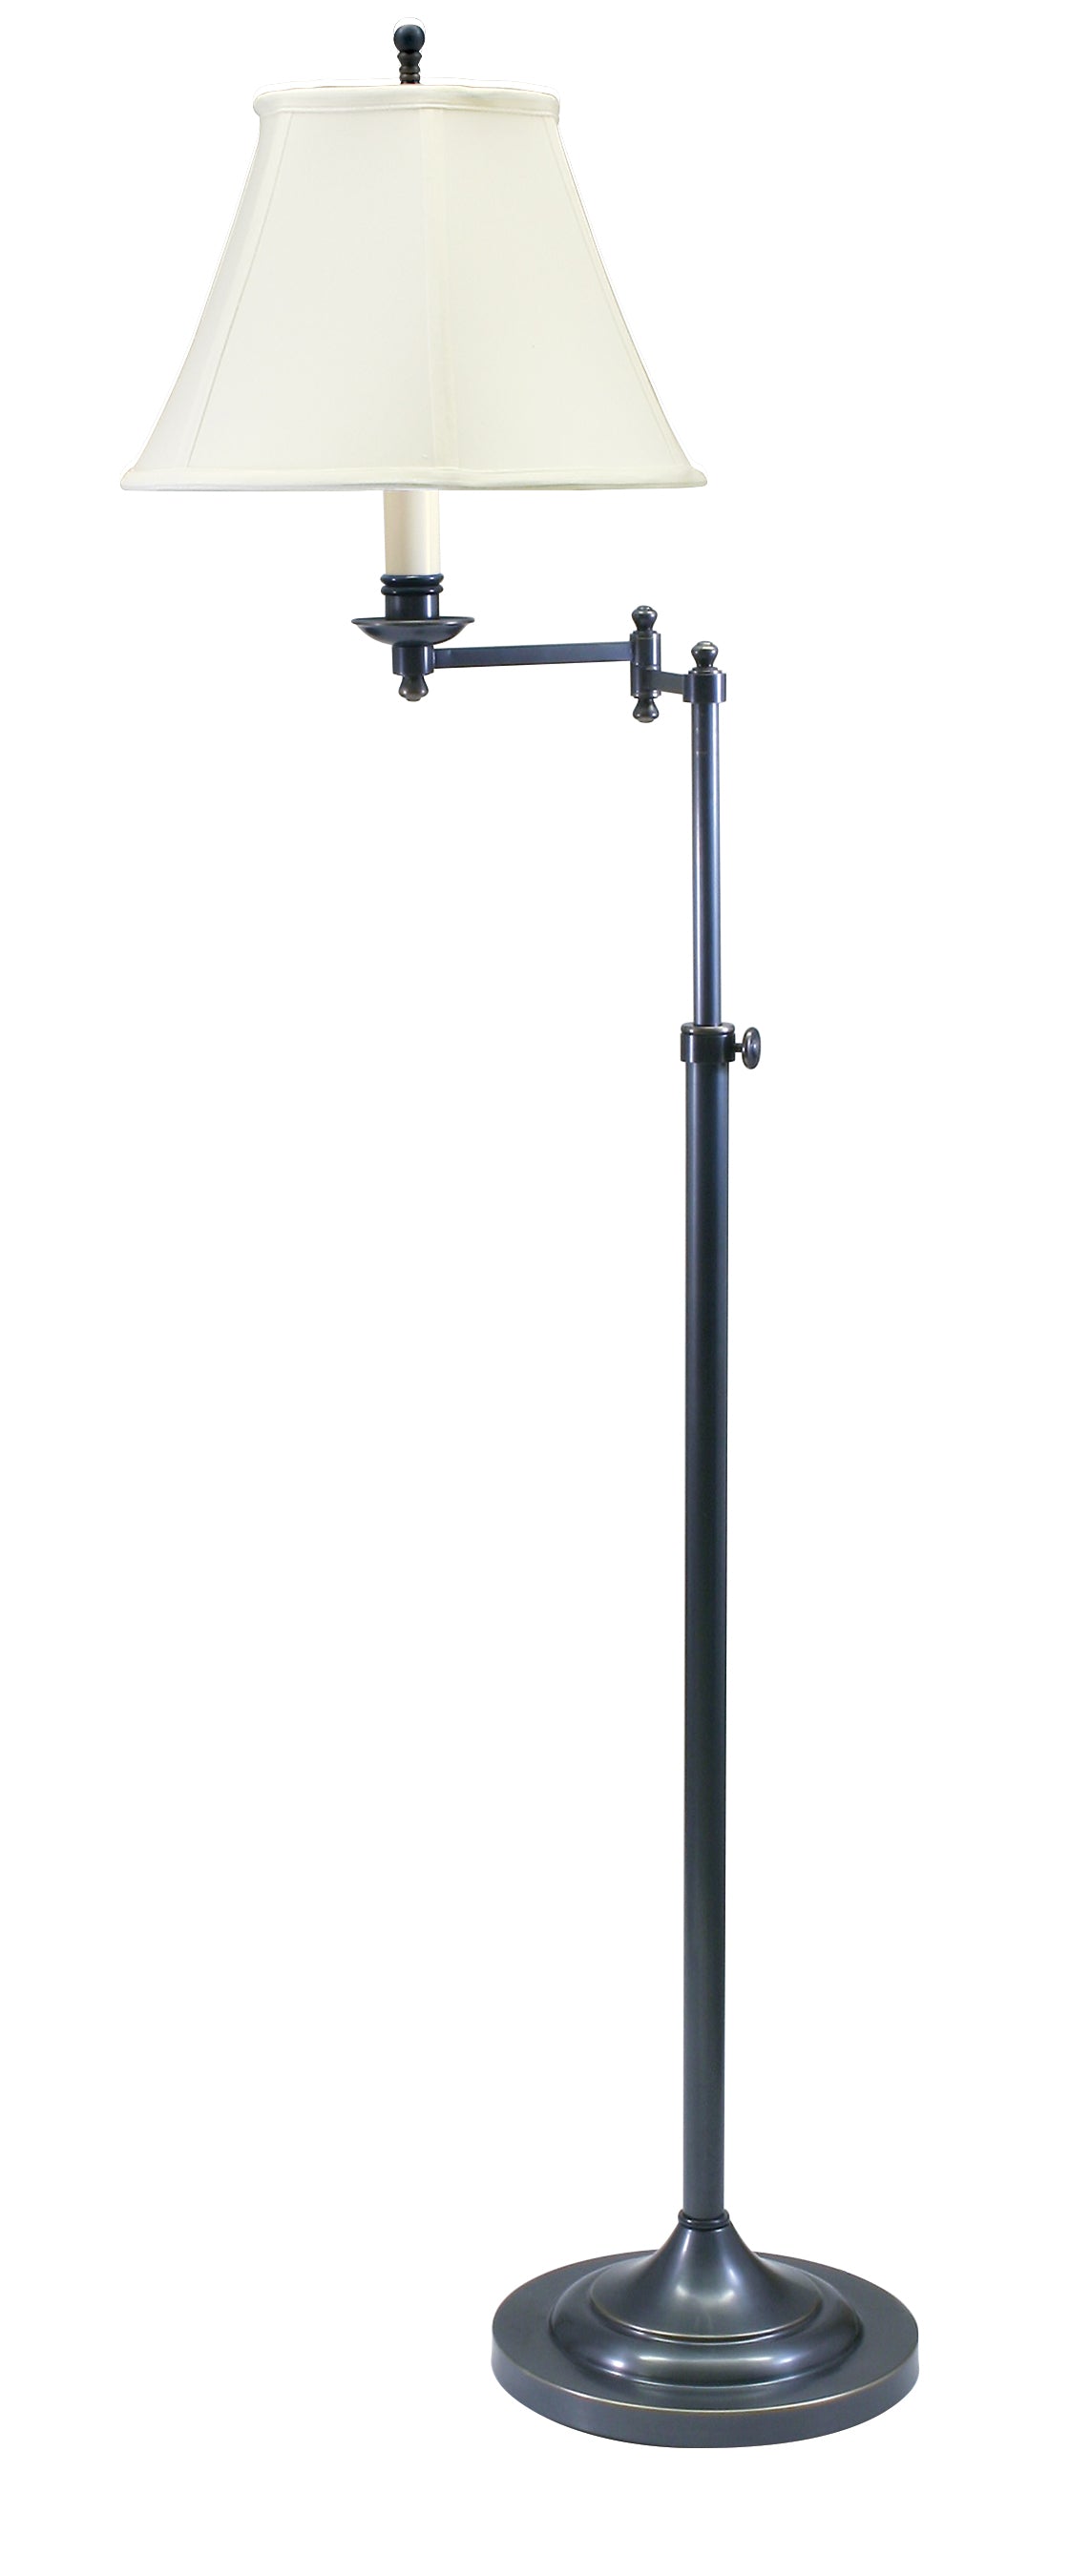 House of Troy Club Adjustable Oil Rubbed Bronze Floor Lamp CL200-OB